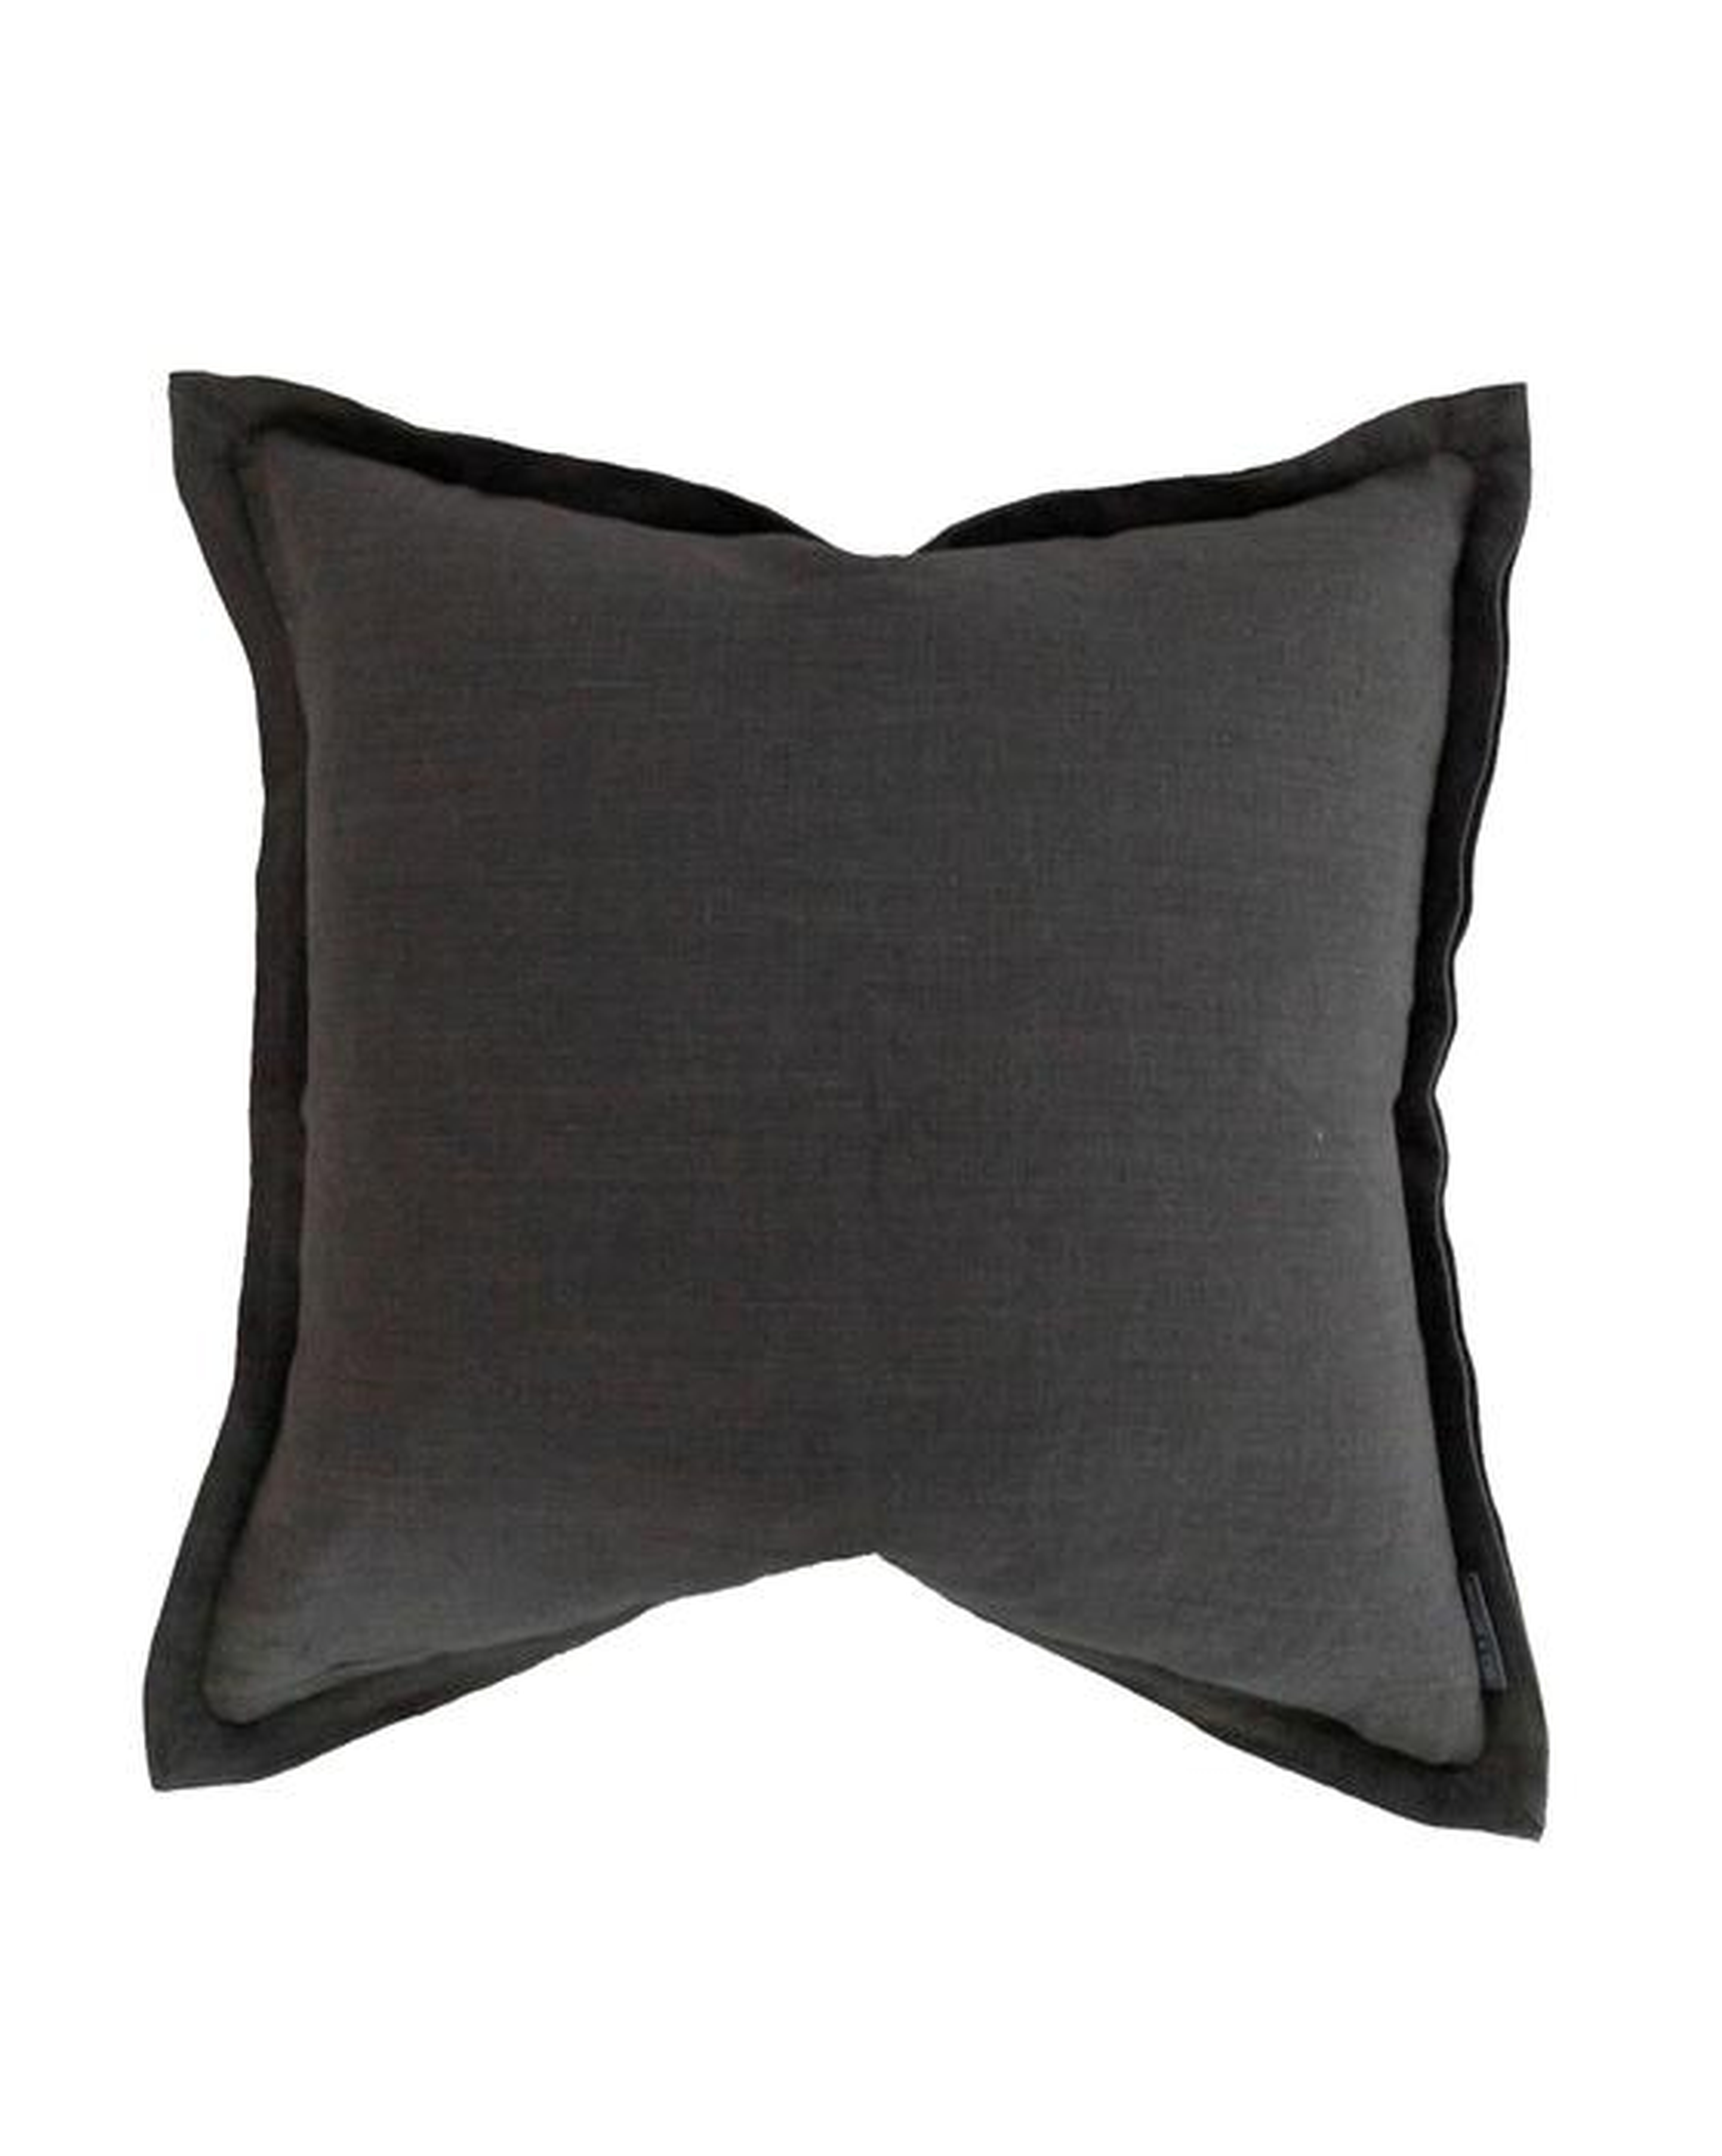 Liam Double Flange Pillow Cover, 24" x 24" - McGee & Co.